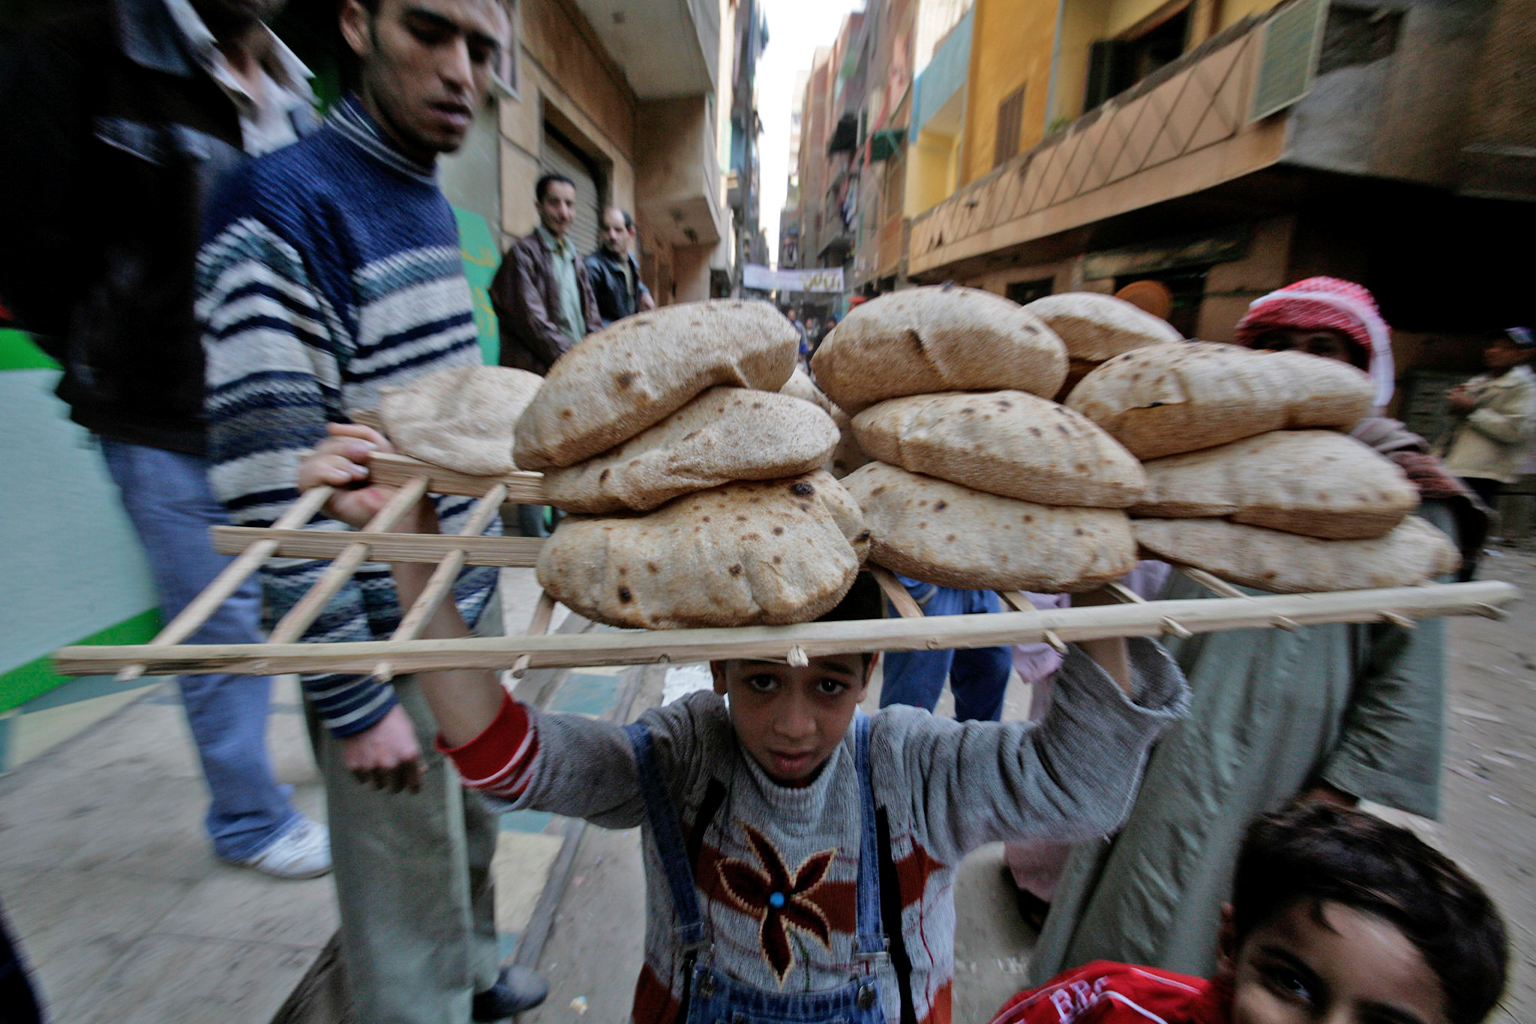 A boy carries bread in Egypt.